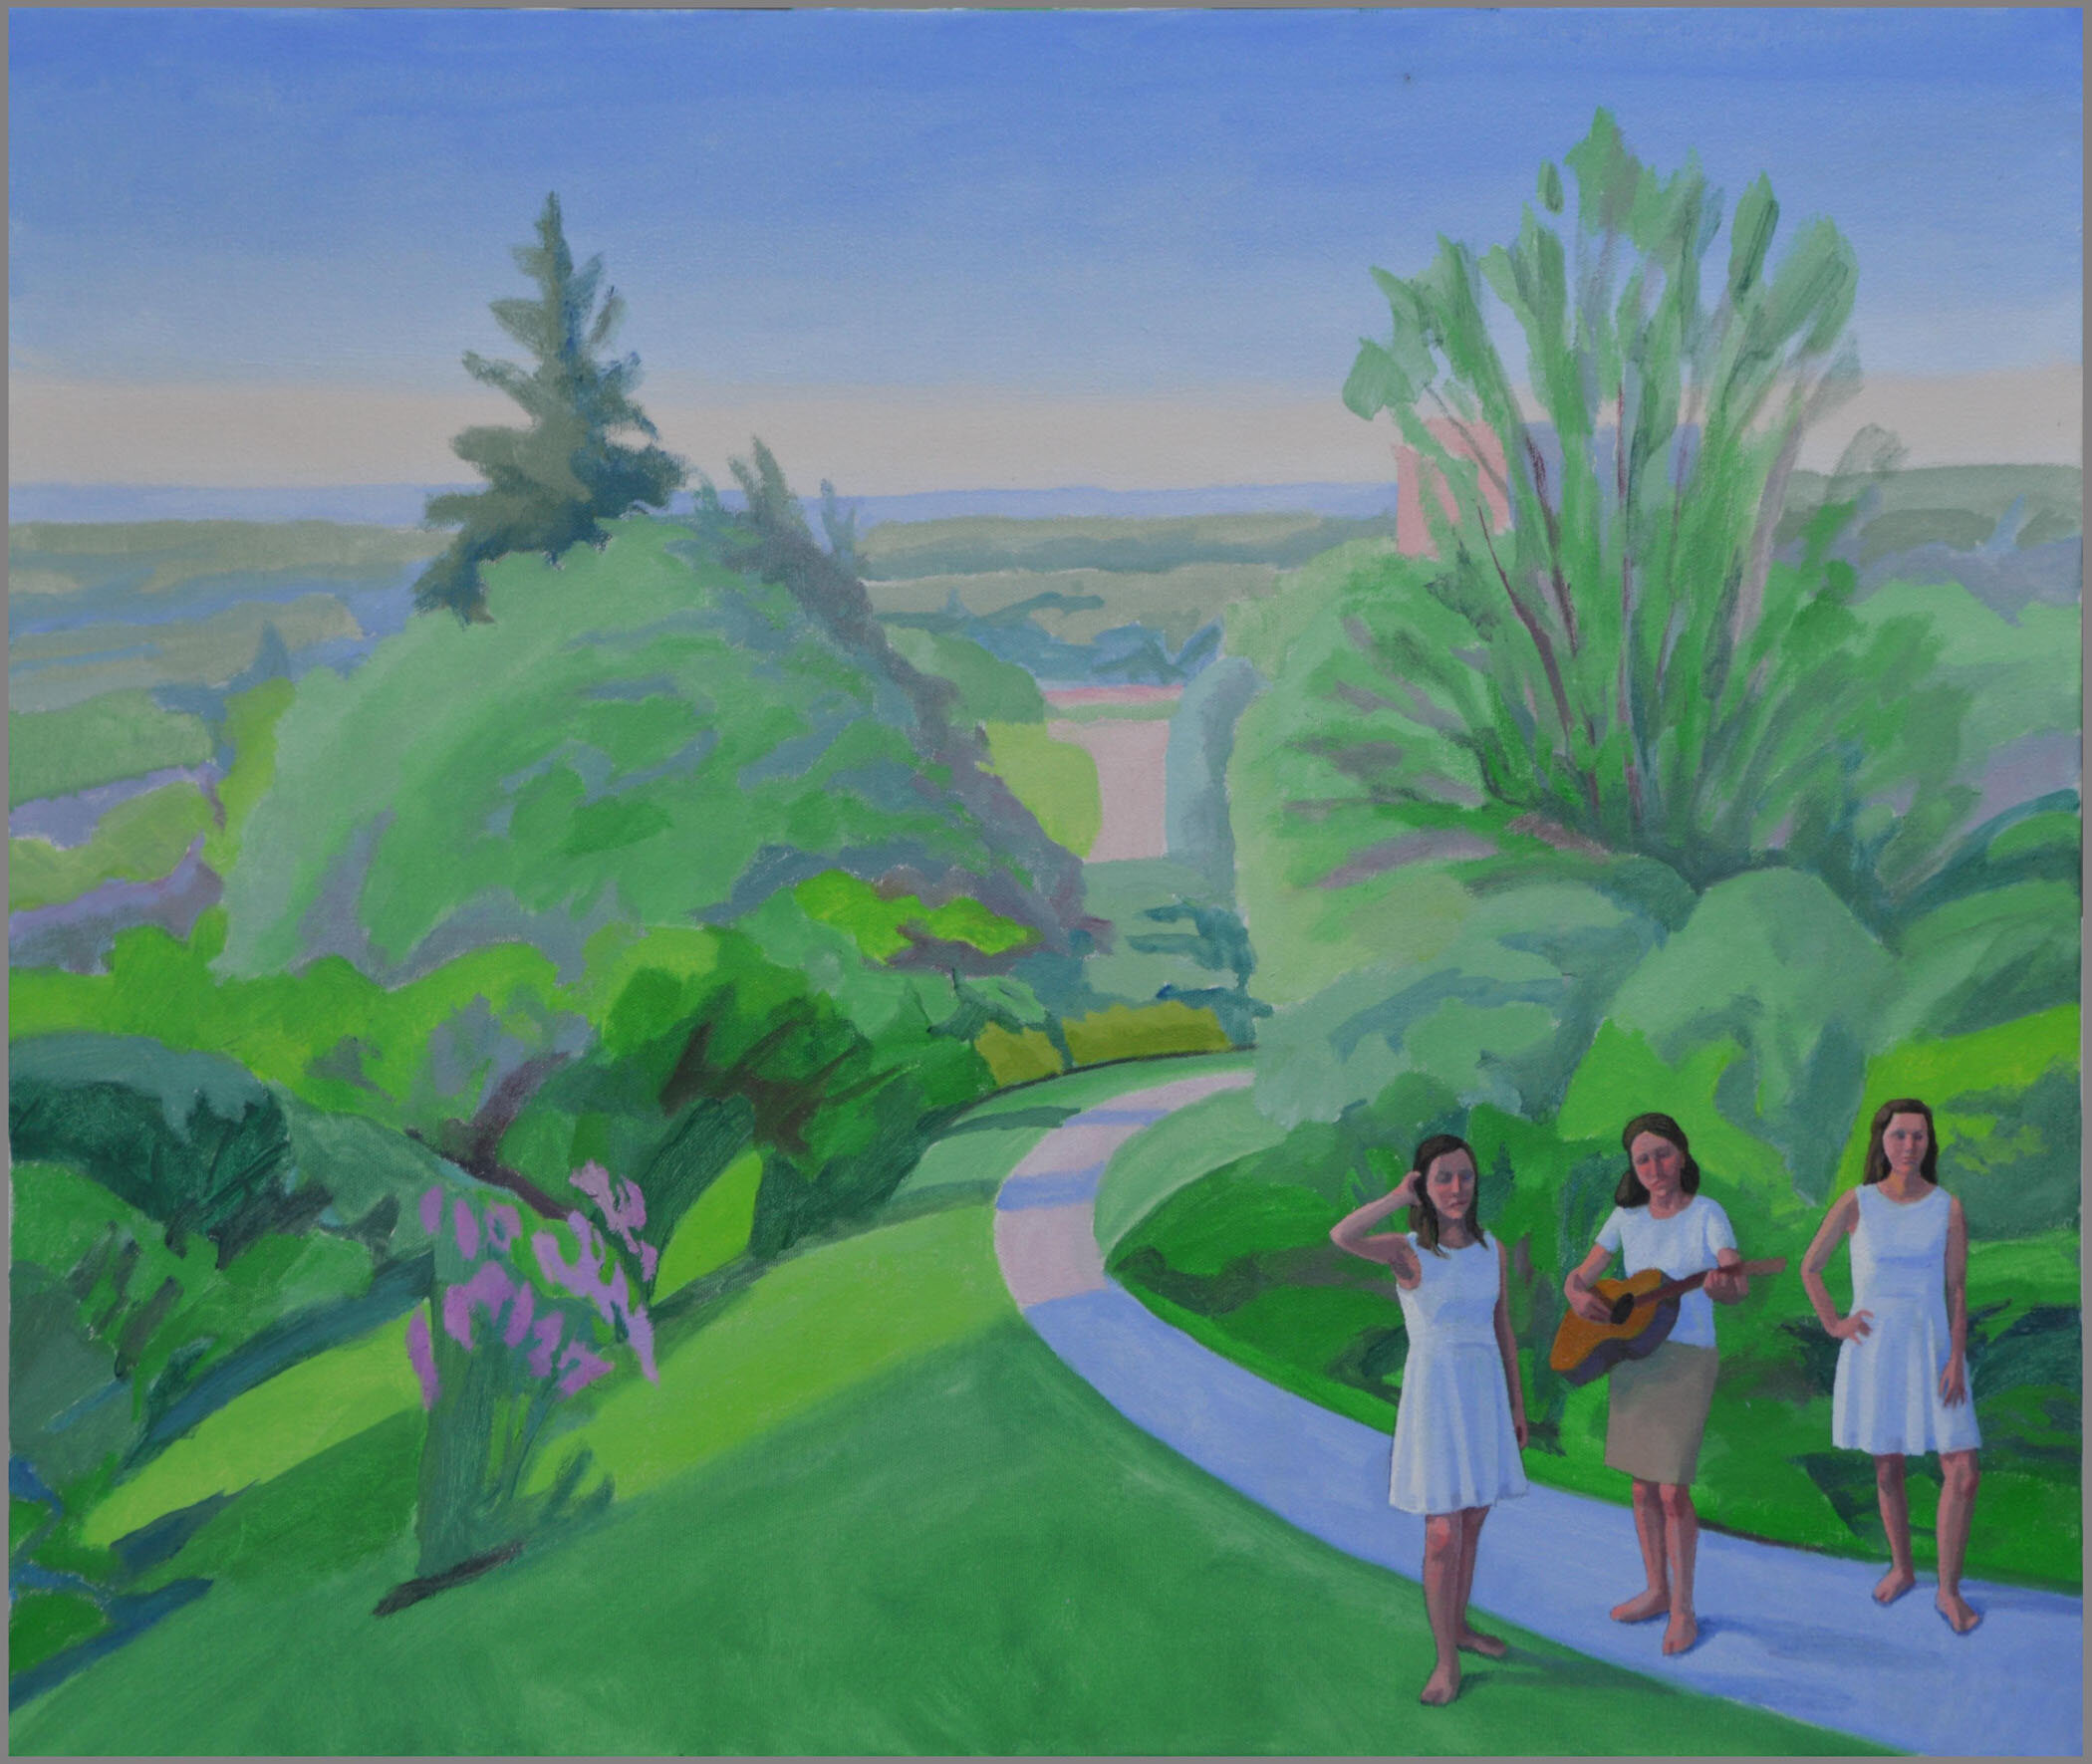 Three Graces in Highland Park-Looking South, oil/canvas, 22 x 26 inches